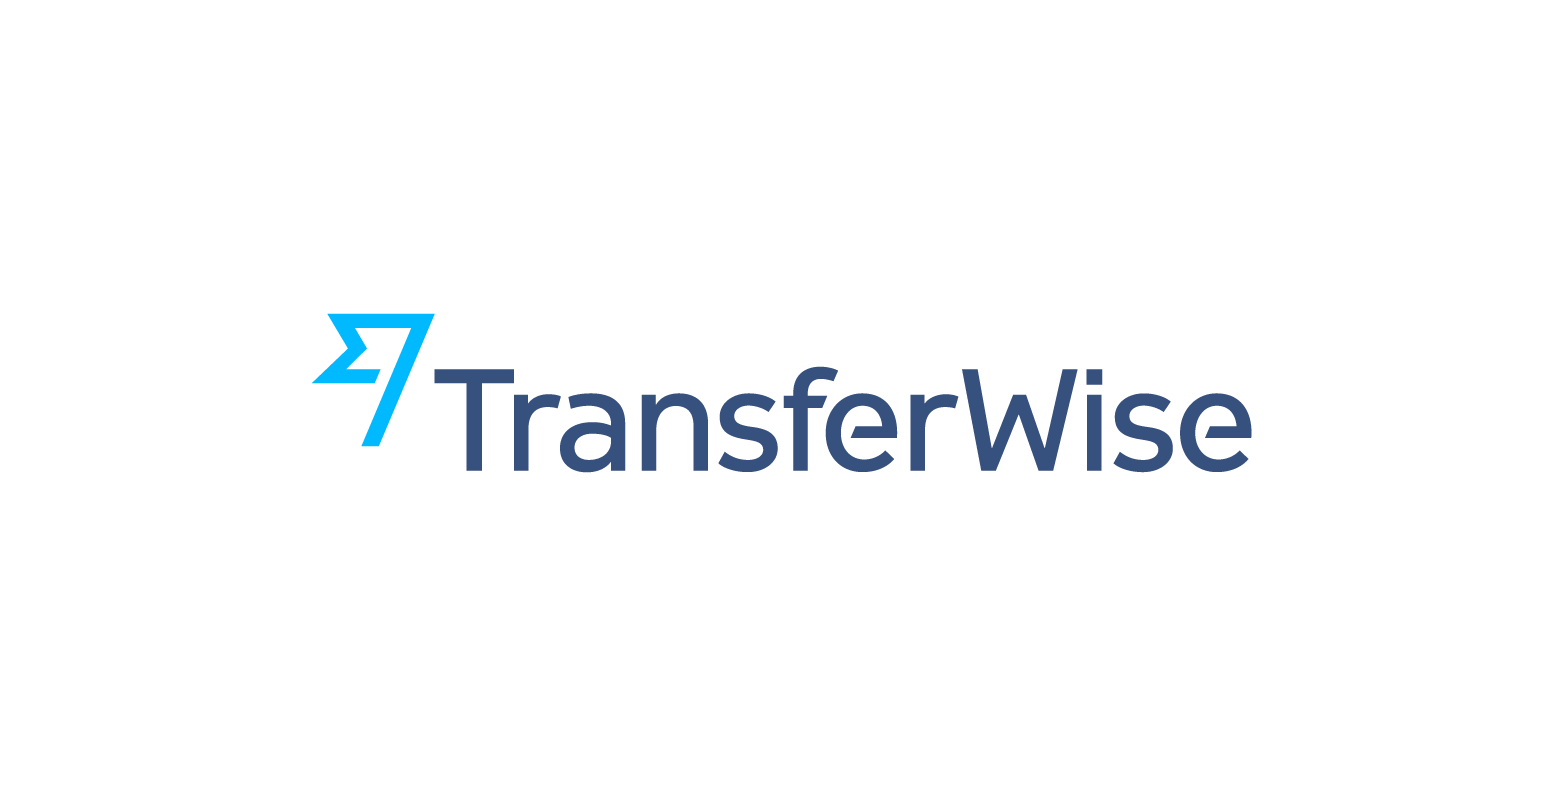 TransferWise to offer retail investment services in UK